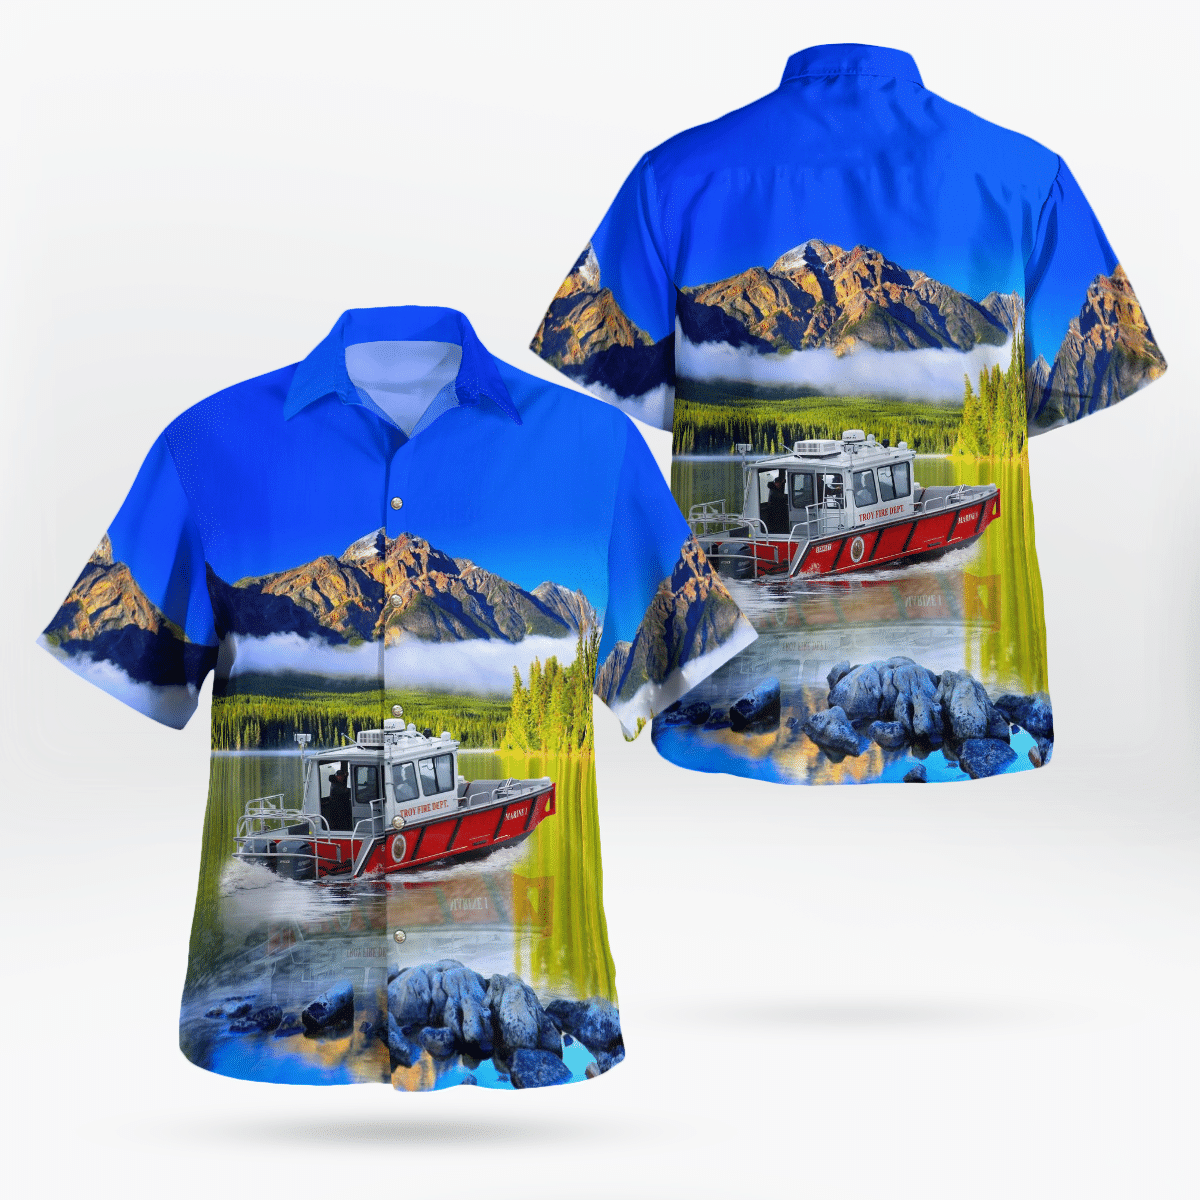 If you are in need of a new summertime look, pick up this Hawaiian shirt 1